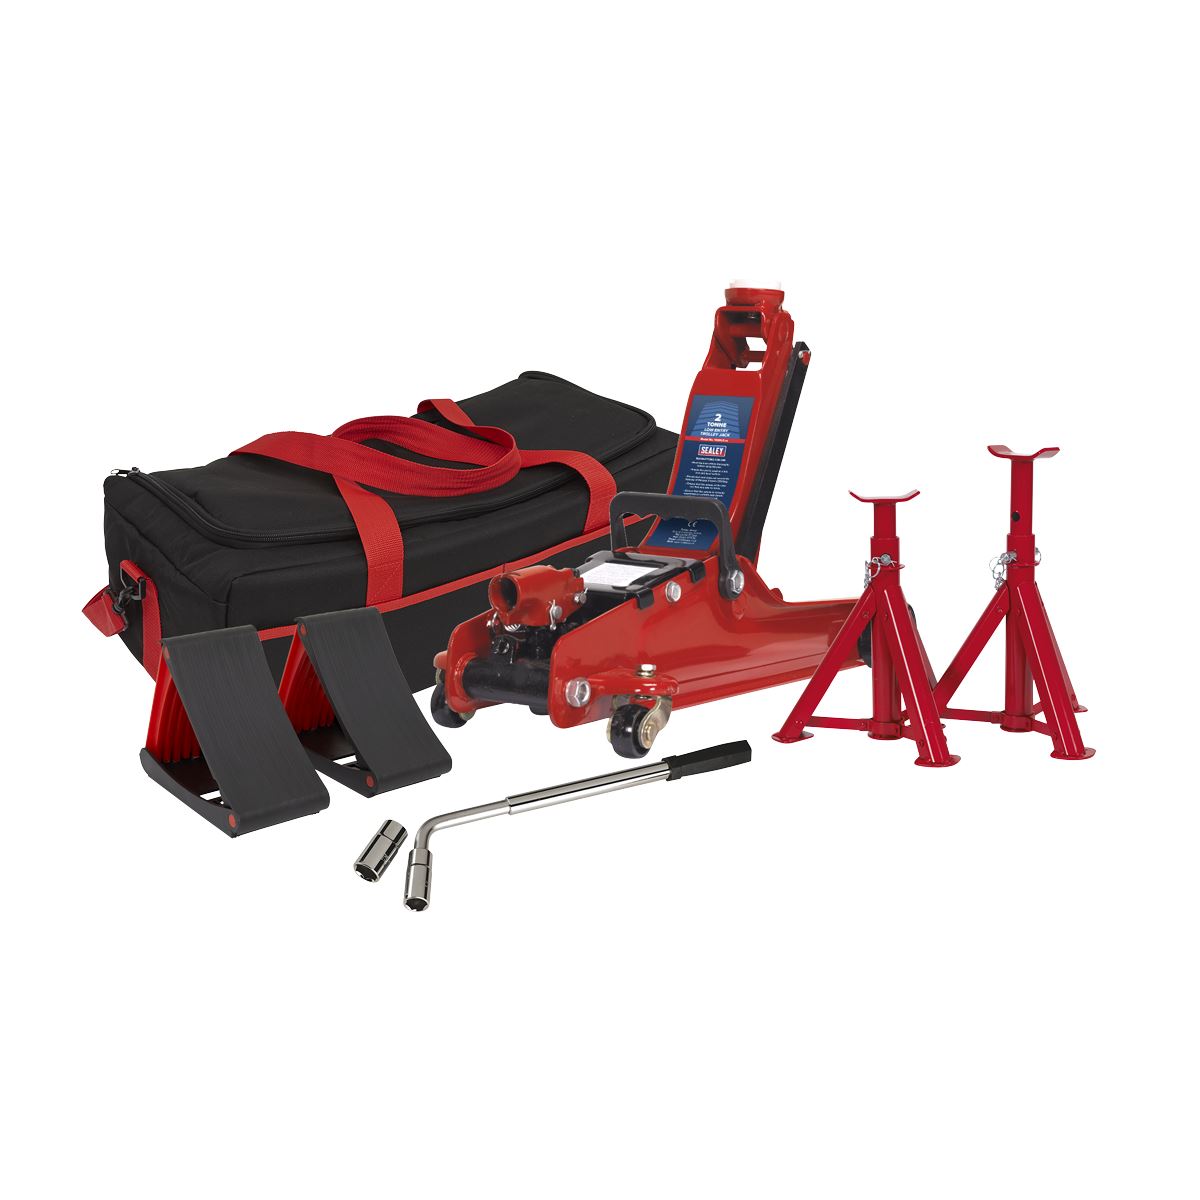 Sealey Trolley Jack 2 Tonne Low Entry Short Chassis & Accessories Bag Combo - Red